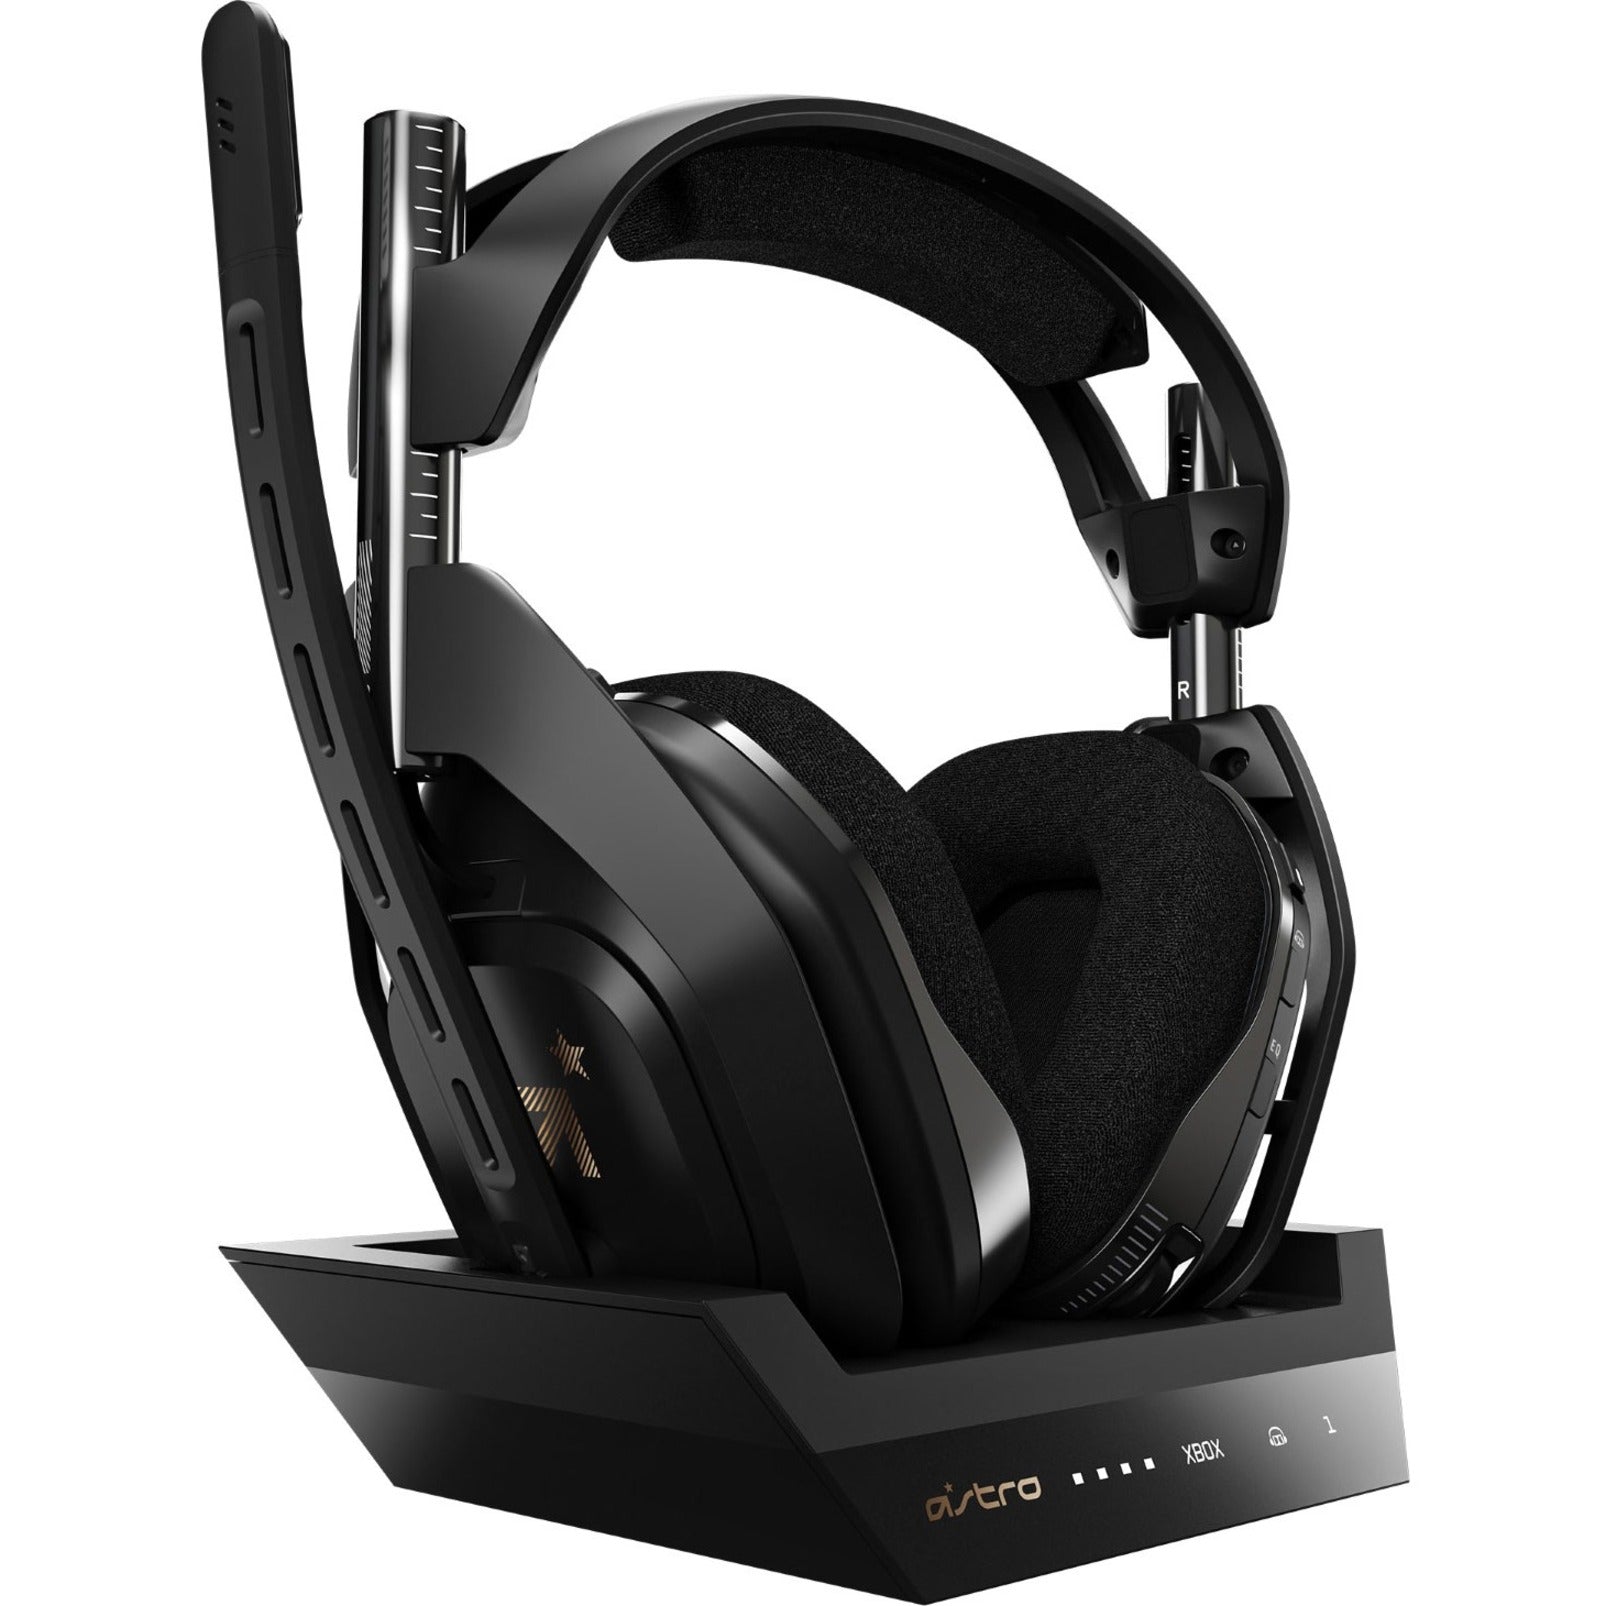 Astro 939-001680 A50 Wireless Headset with Lithium-Ion Battery, Noise Cancelling, Stereo Sound, 30 ft Wireless Range